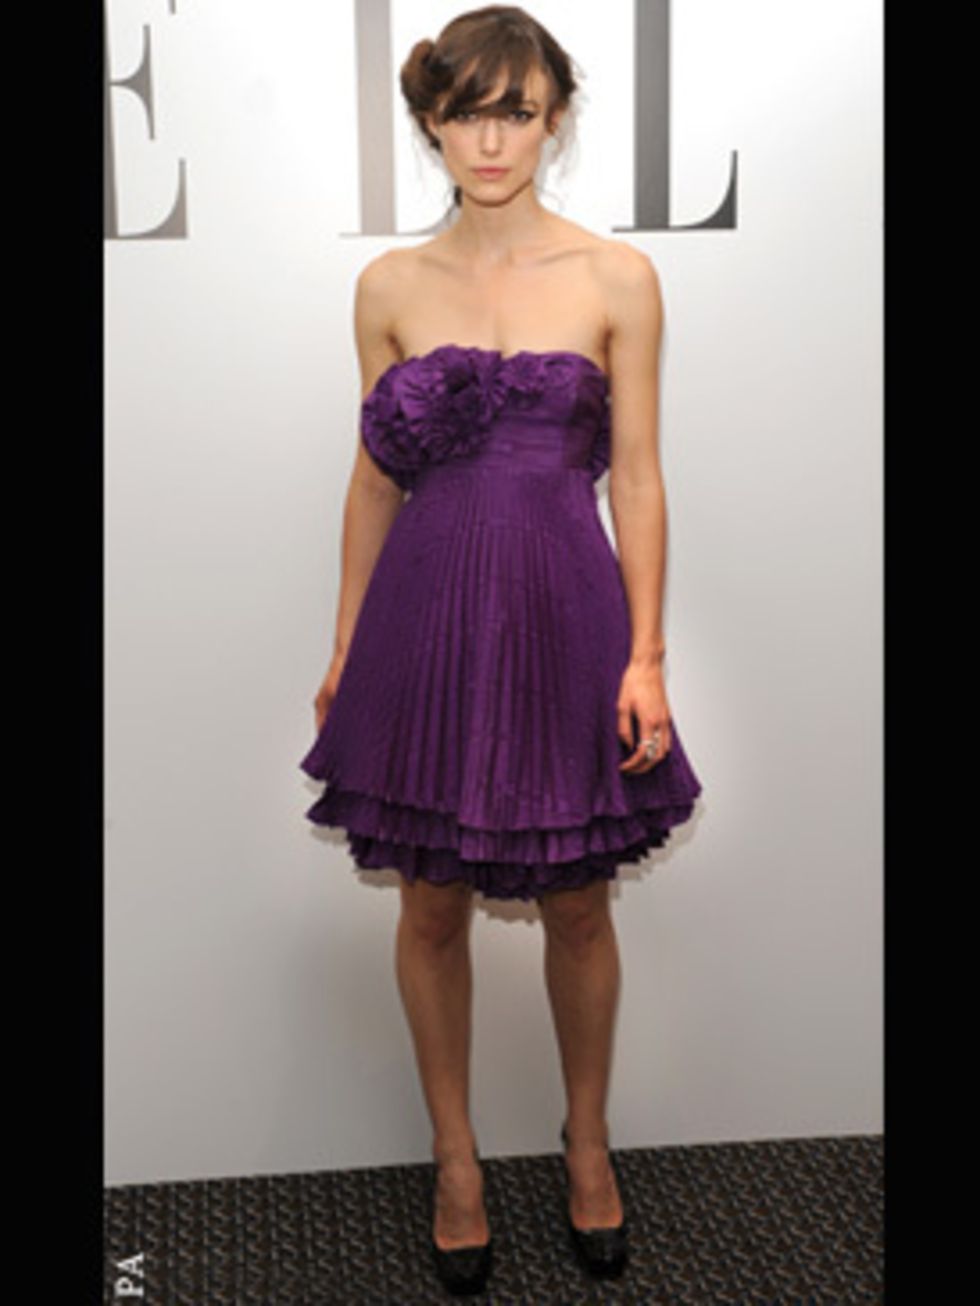 <p>Keira Knightly wore an Erdem dress, Moschino shoes and a diamond cocktail ring by Van Cleef for last night's premiere.</p>